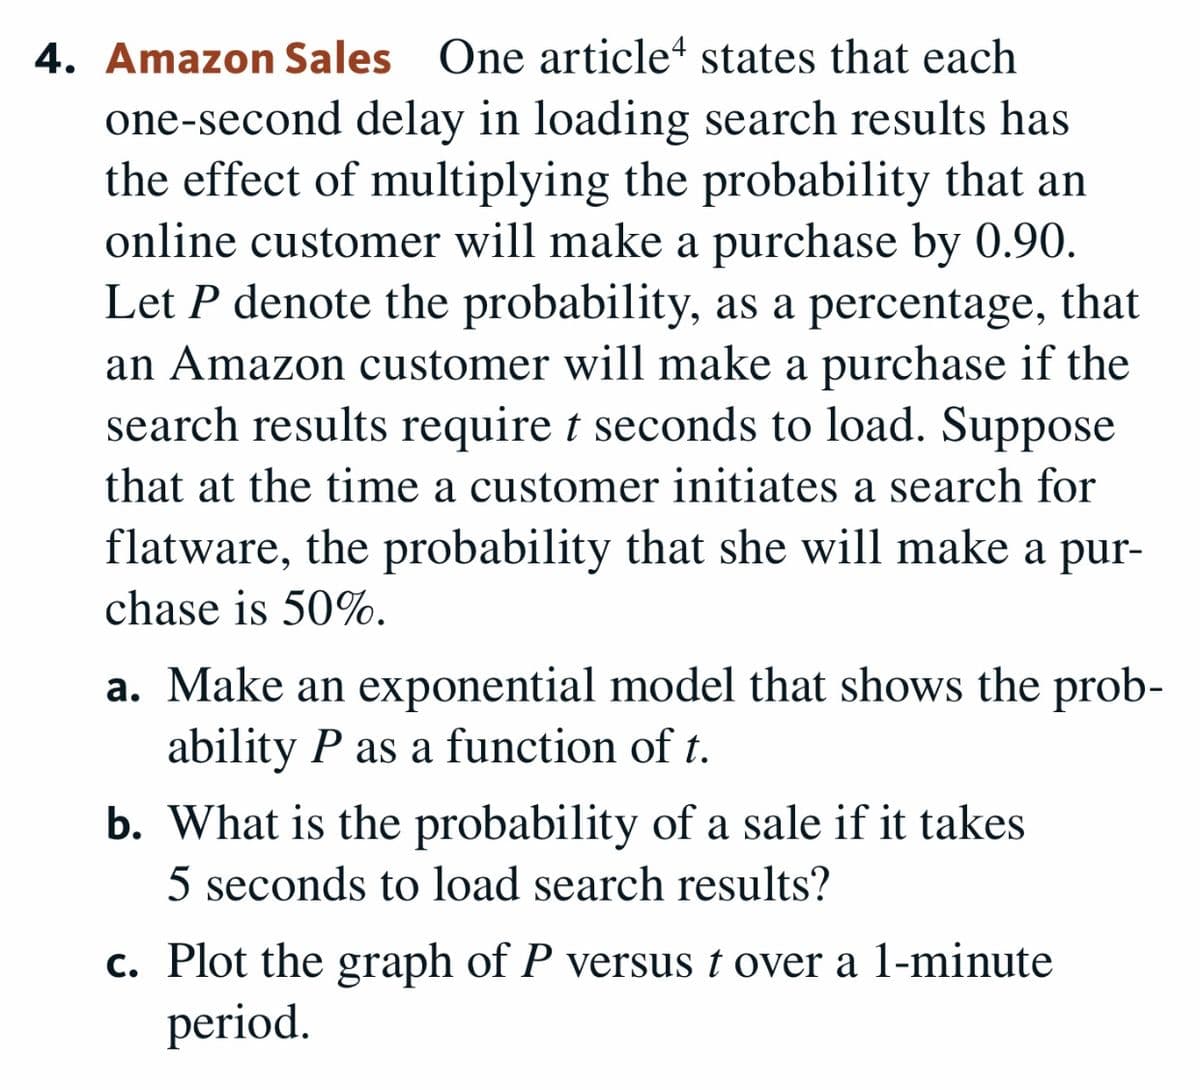 4. Amazon Sales One article“ states that each
one-second delay in loading search results has
the effect of multiplying the probability that an
online customer will make a purchase by 0.90.
Let P denote the probability, as a percentage, that
an Amazon customer will make a purchase if the
search results require t seconds to load. Suppose
that at the time a customer initiates a search for
flatware, the probability that she will make a pur-
chase is 50%.
a. Make an exponential model that shows the prob-
ability P as a function of t.
b. What is the probability of a sale if it takes
5 seconds to load search results?
c. Plot the graph of P versus t over a 1-minute
period.
